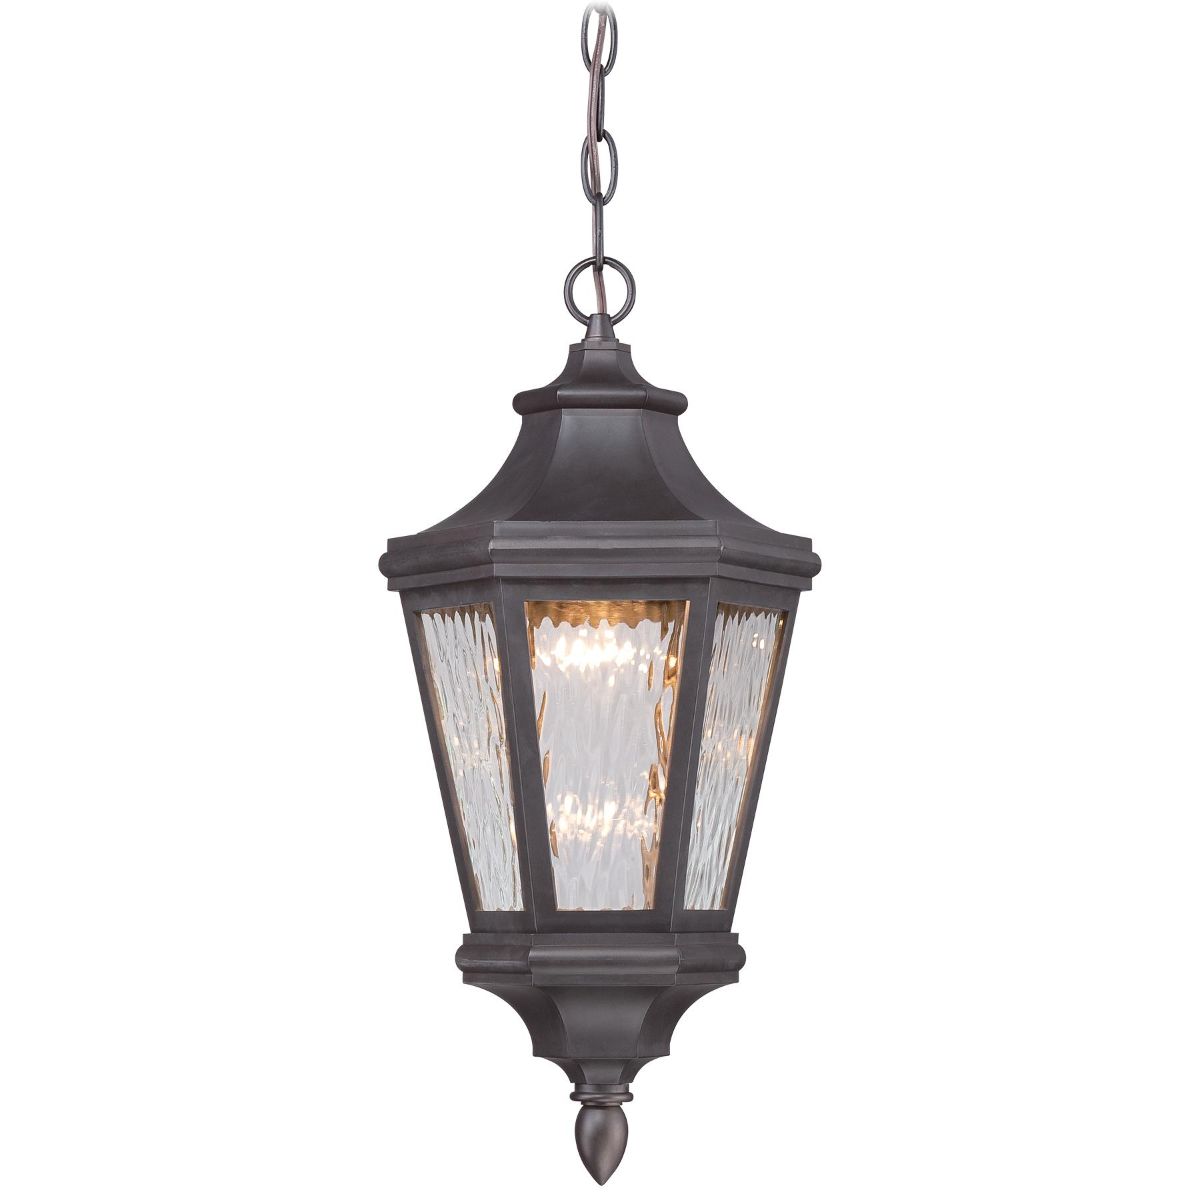 Hanford Pointe 9 in. LED Outdoor Hanging Lantern Oil Rubbed Bronze finish